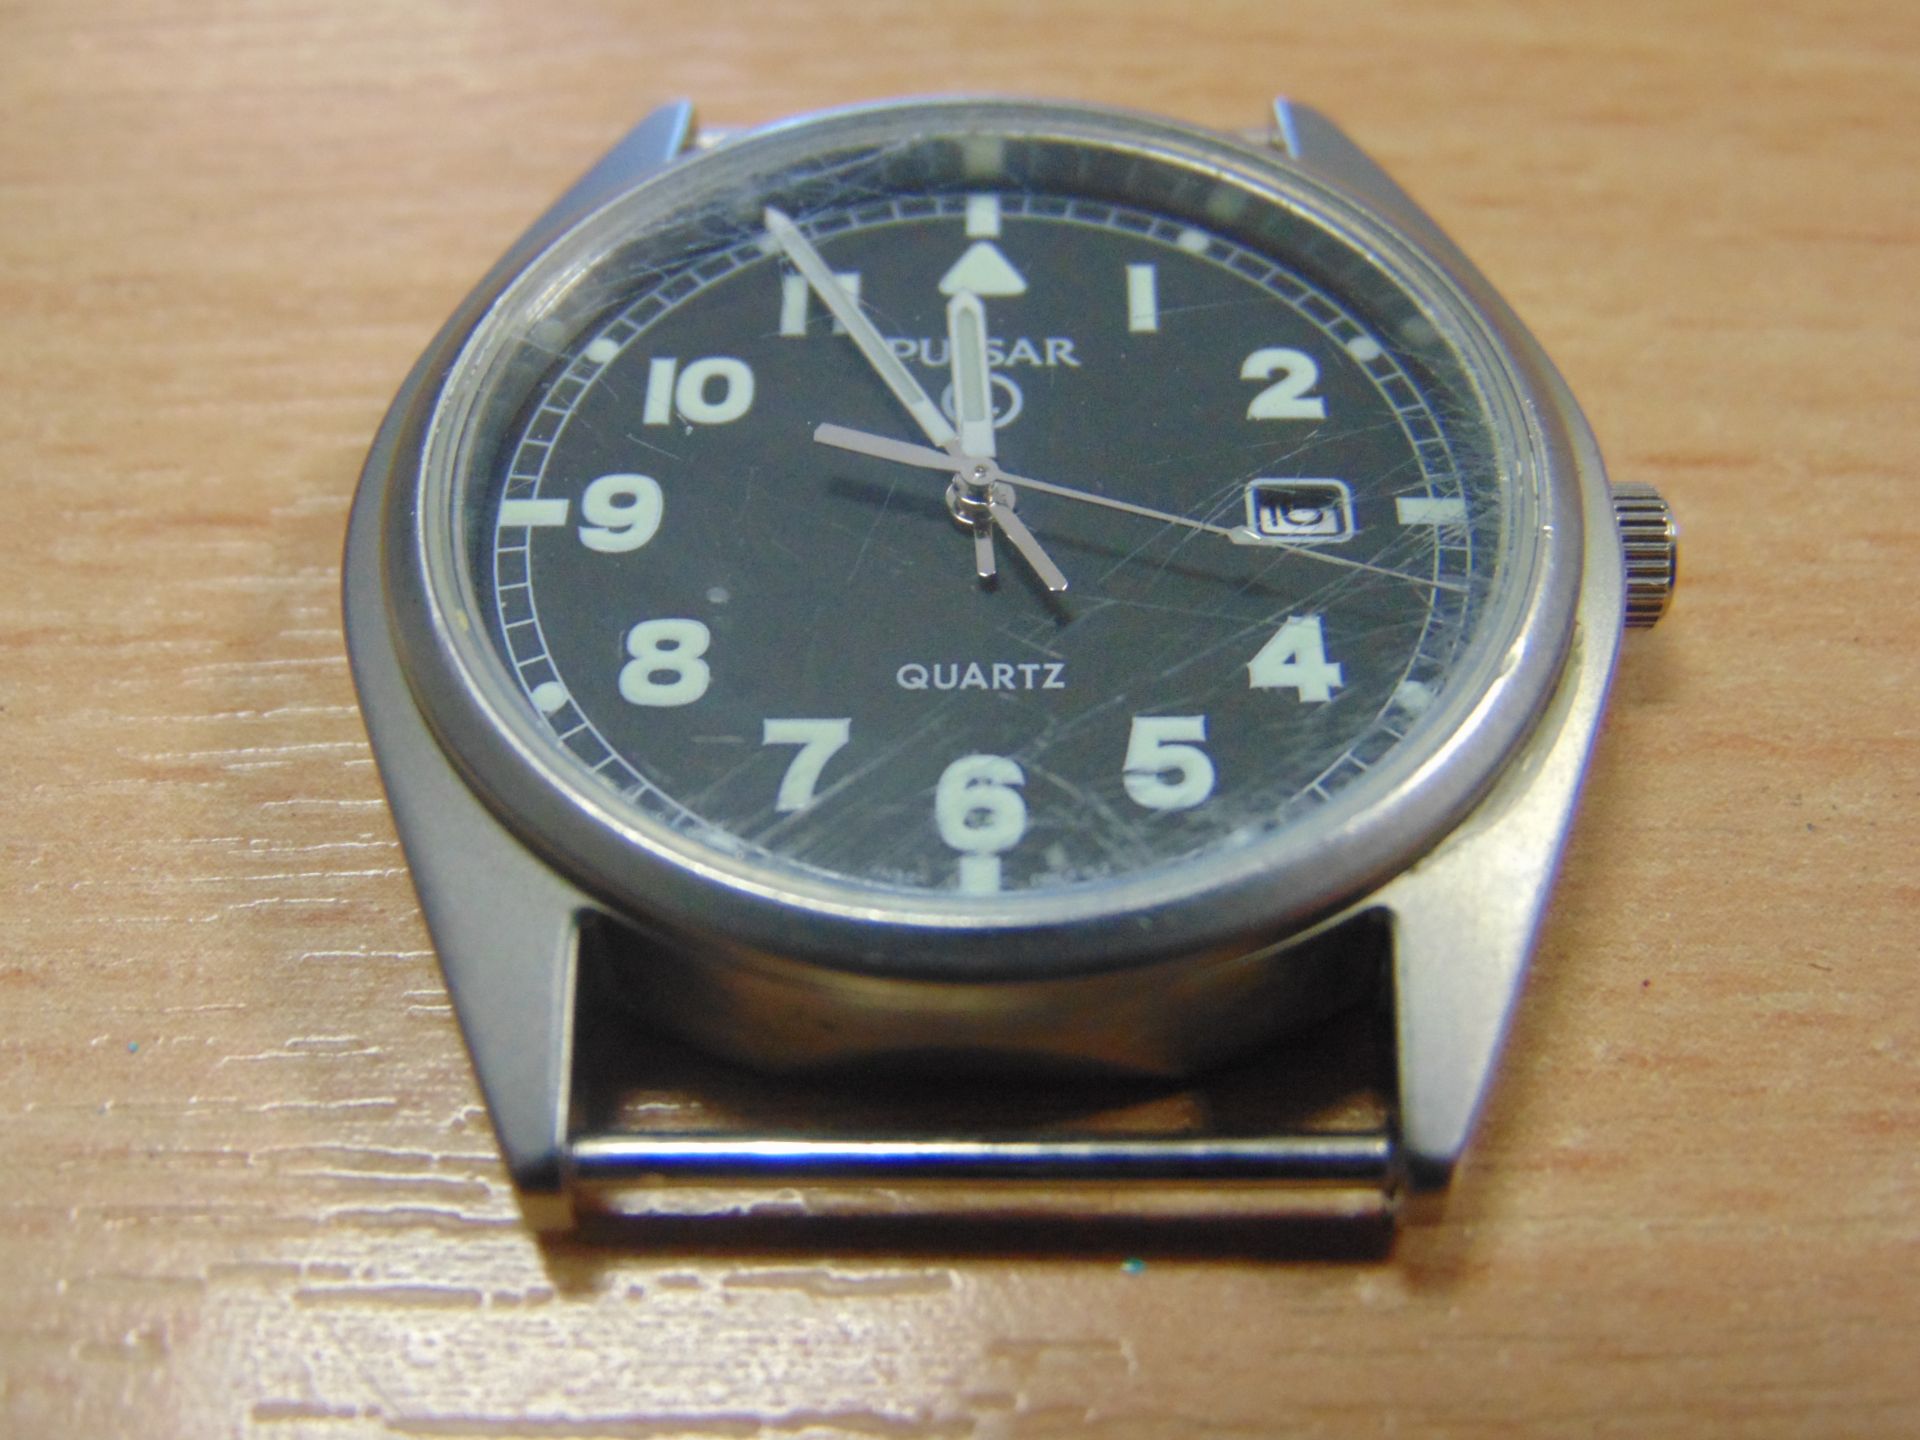 PULSAR W10 BRITISH ISSUE SERVICE WATCH NATO MARKINGS DATED 2004 - Image 6 of 12